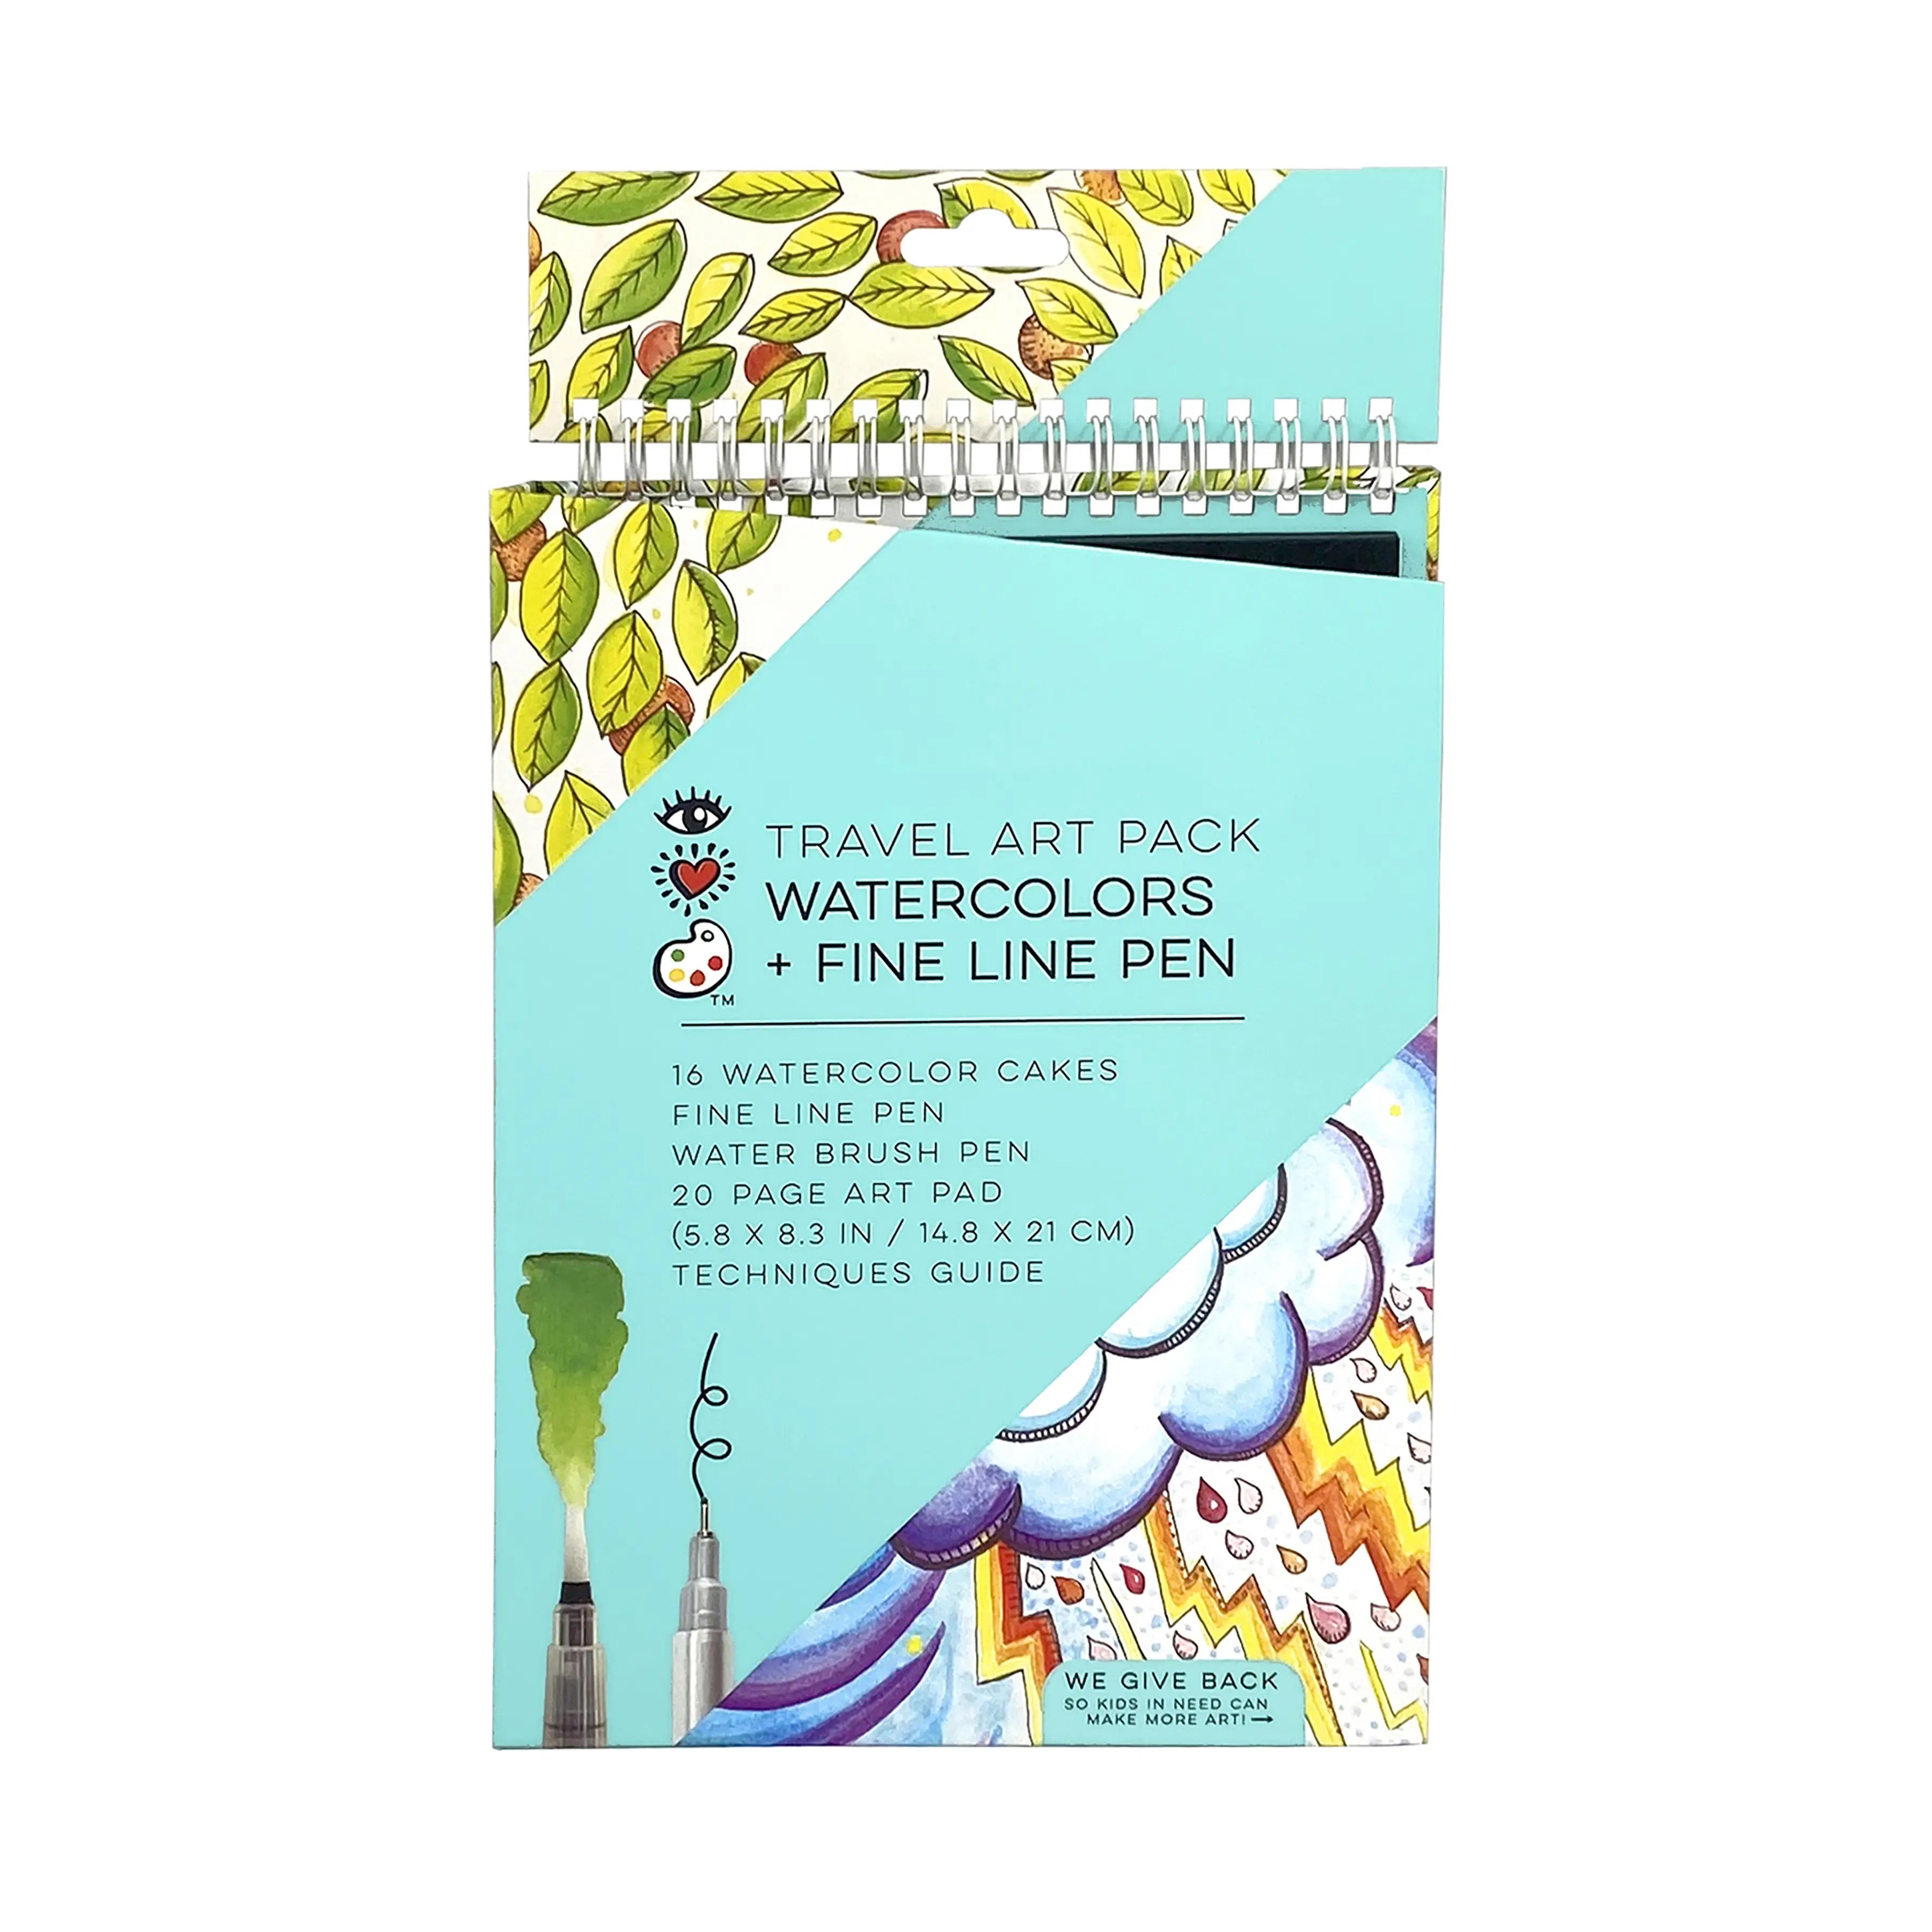 Travel Art Pack Watercolors & Pen by Bright Stripes